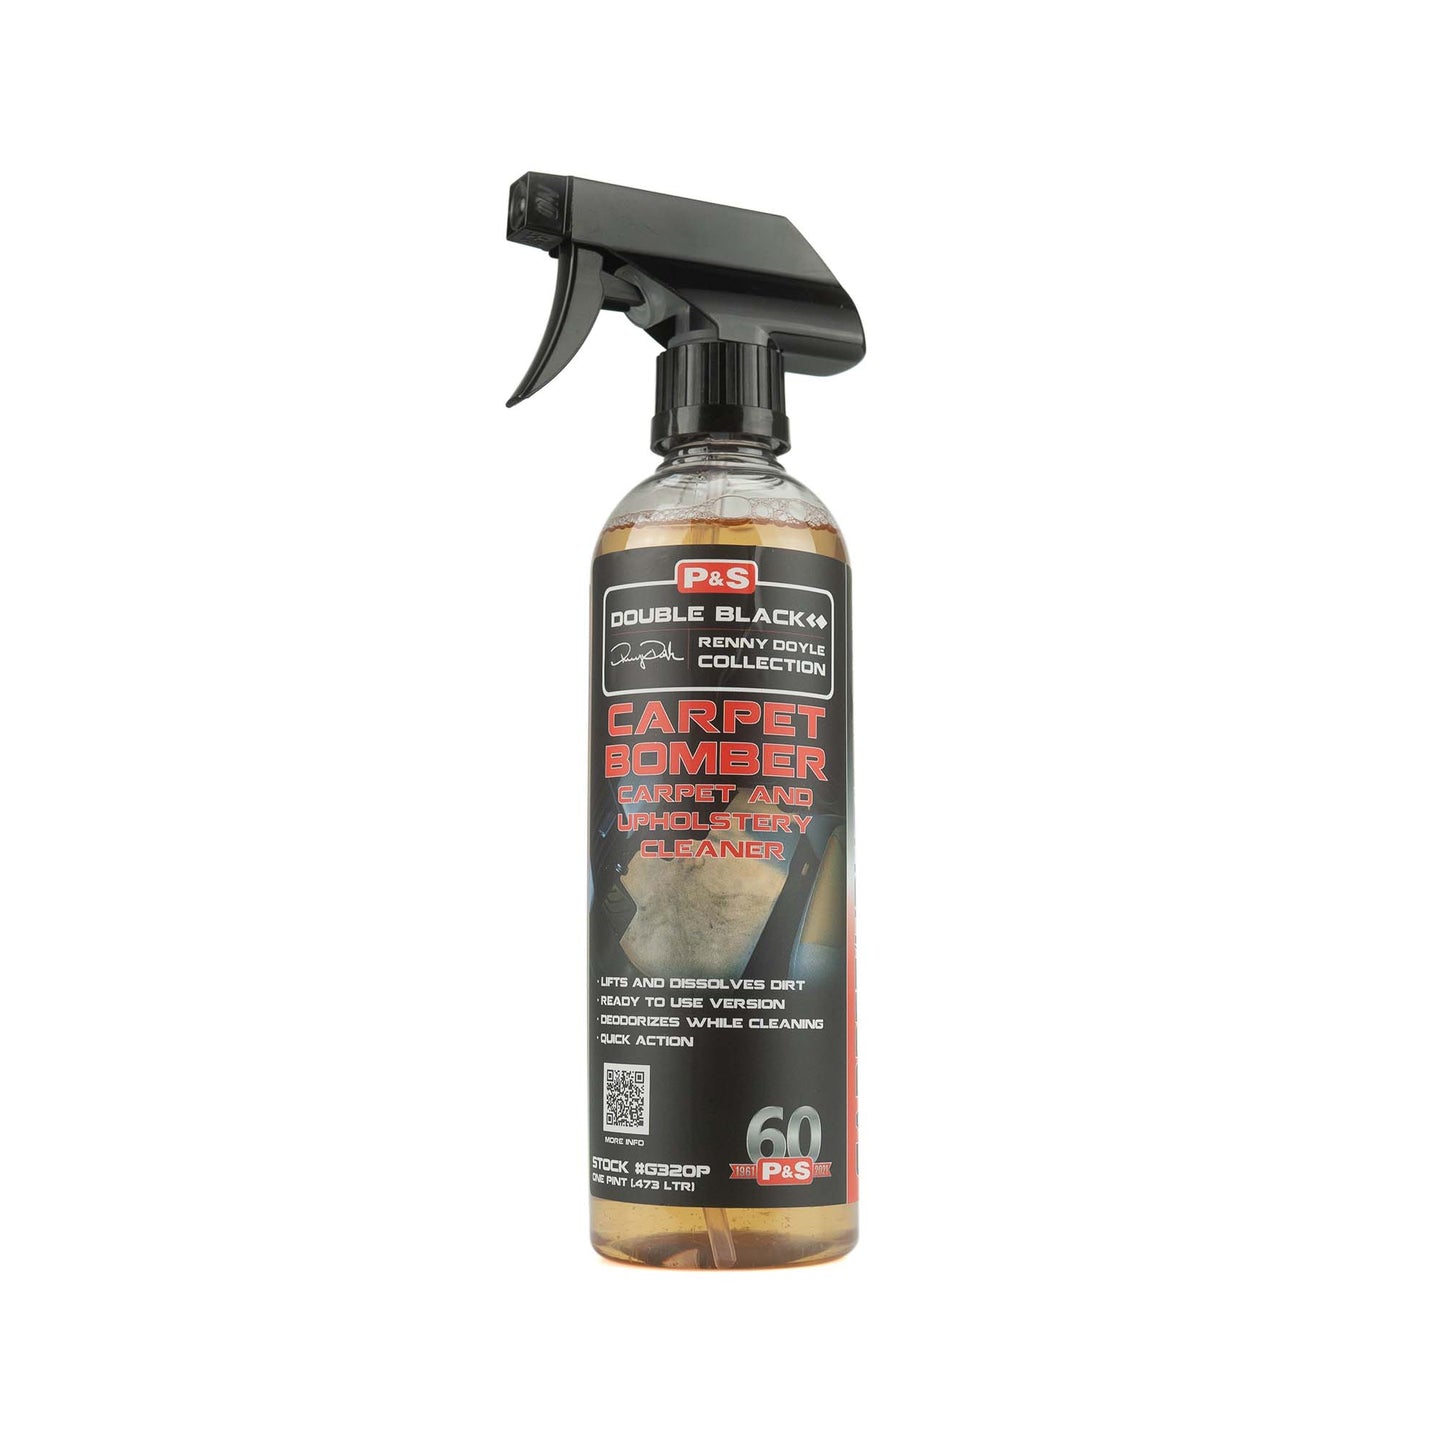 P&S Carpet Bomber Carpet and Upholstery Cleaner interior cleaner auto 